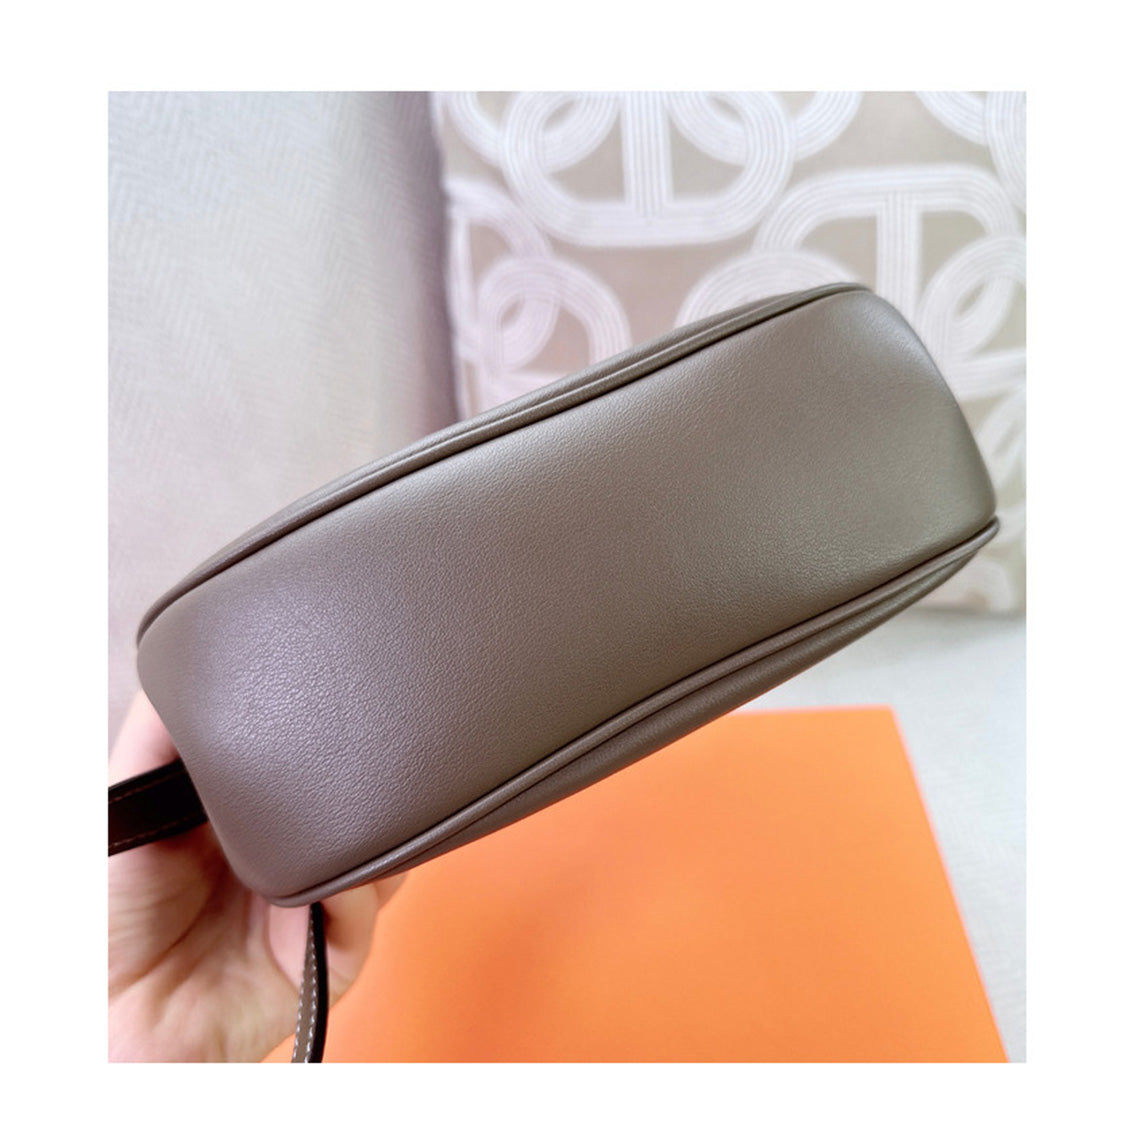 Top Grain Leather New Kelly Saddle Bag